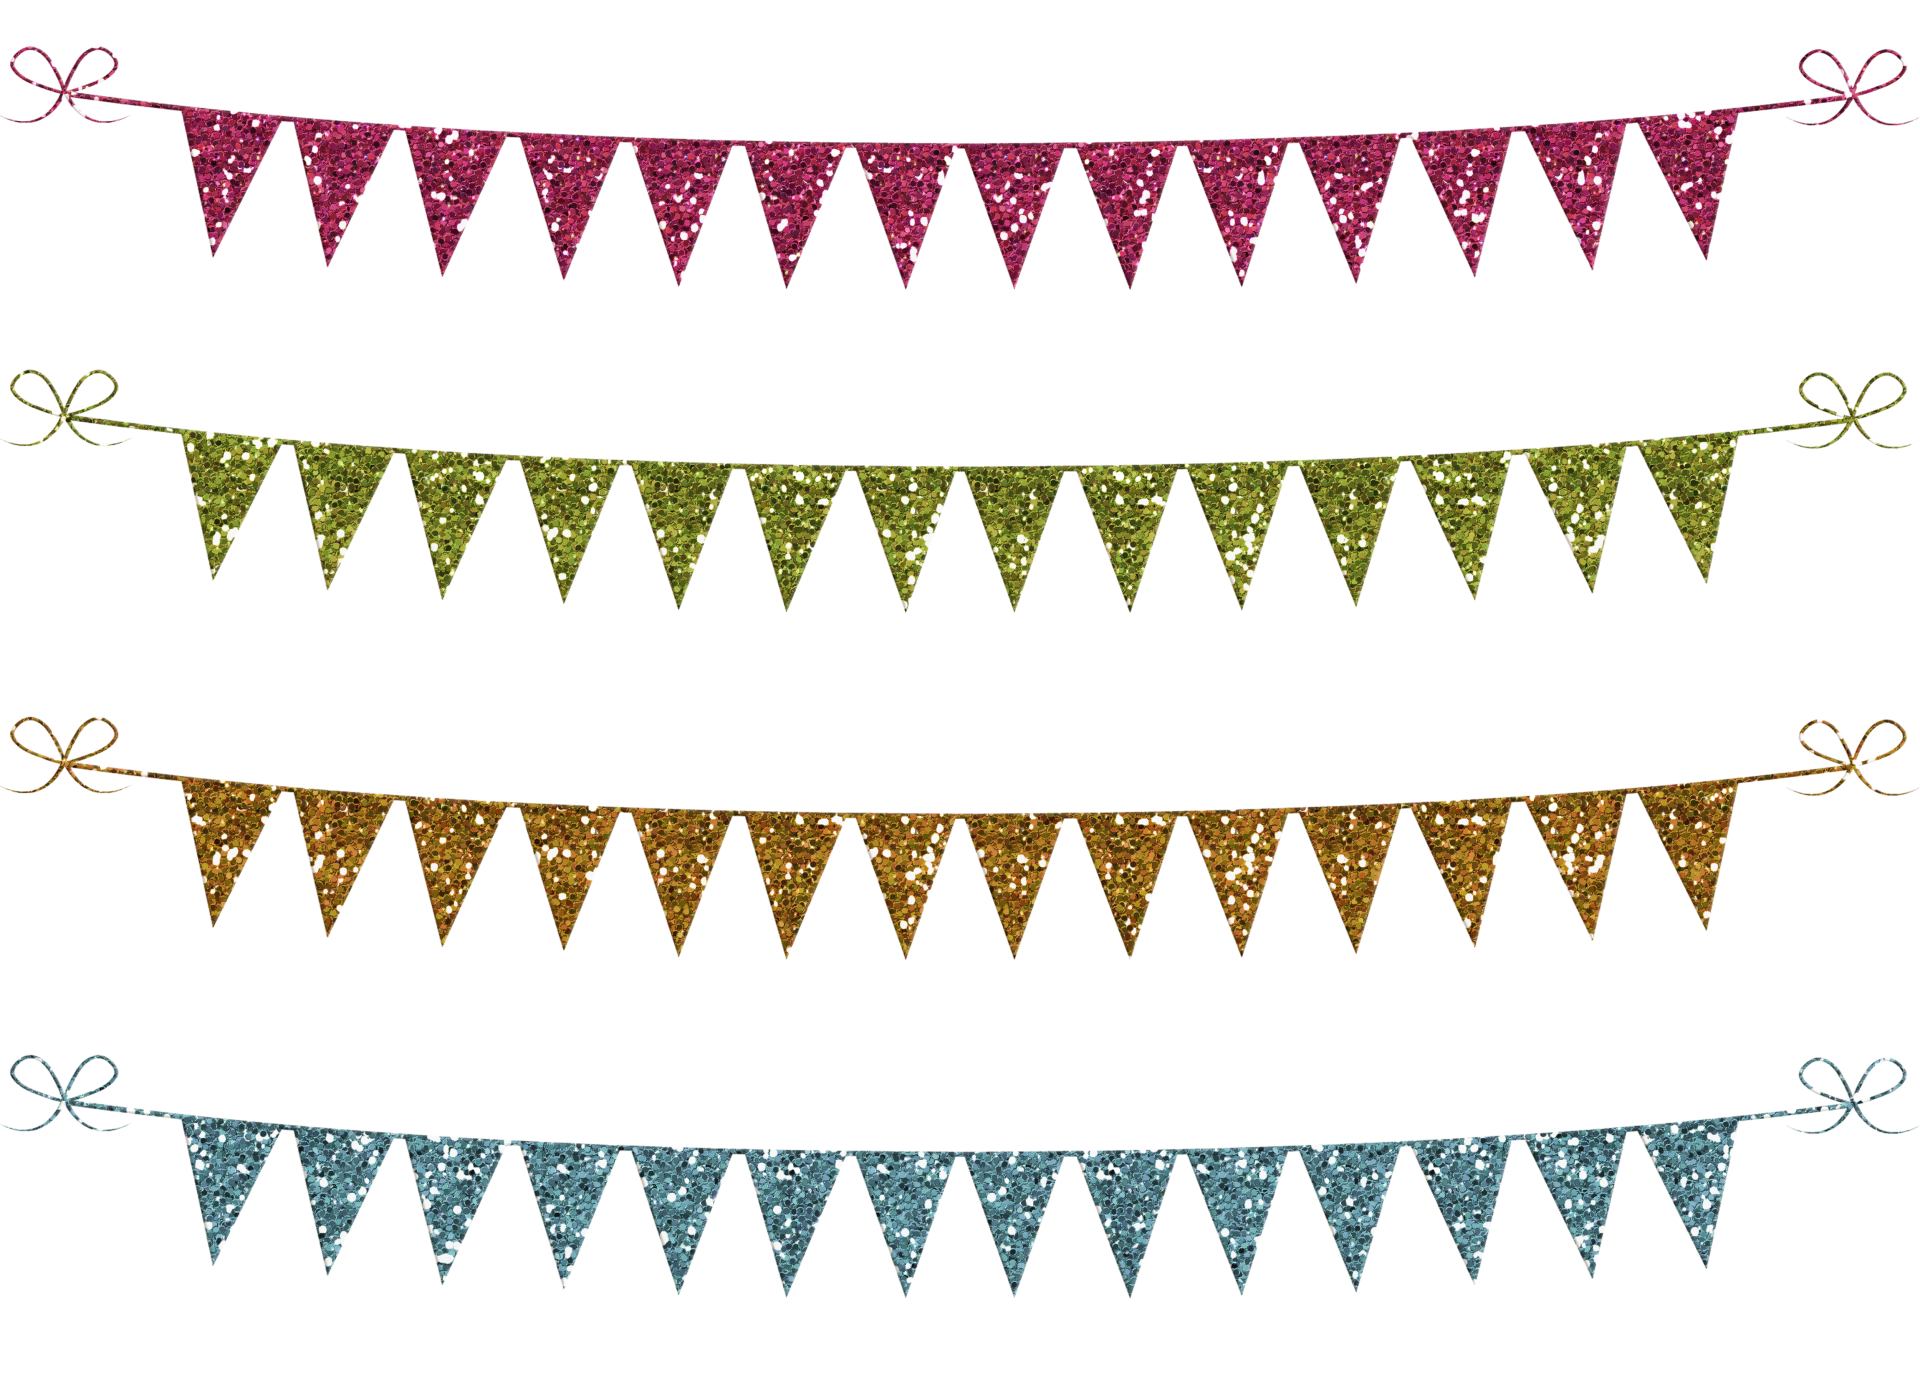 Various Bunting Banners Flags with Patterns, Florals, Stars, Tassels, Watercolors, Etc.